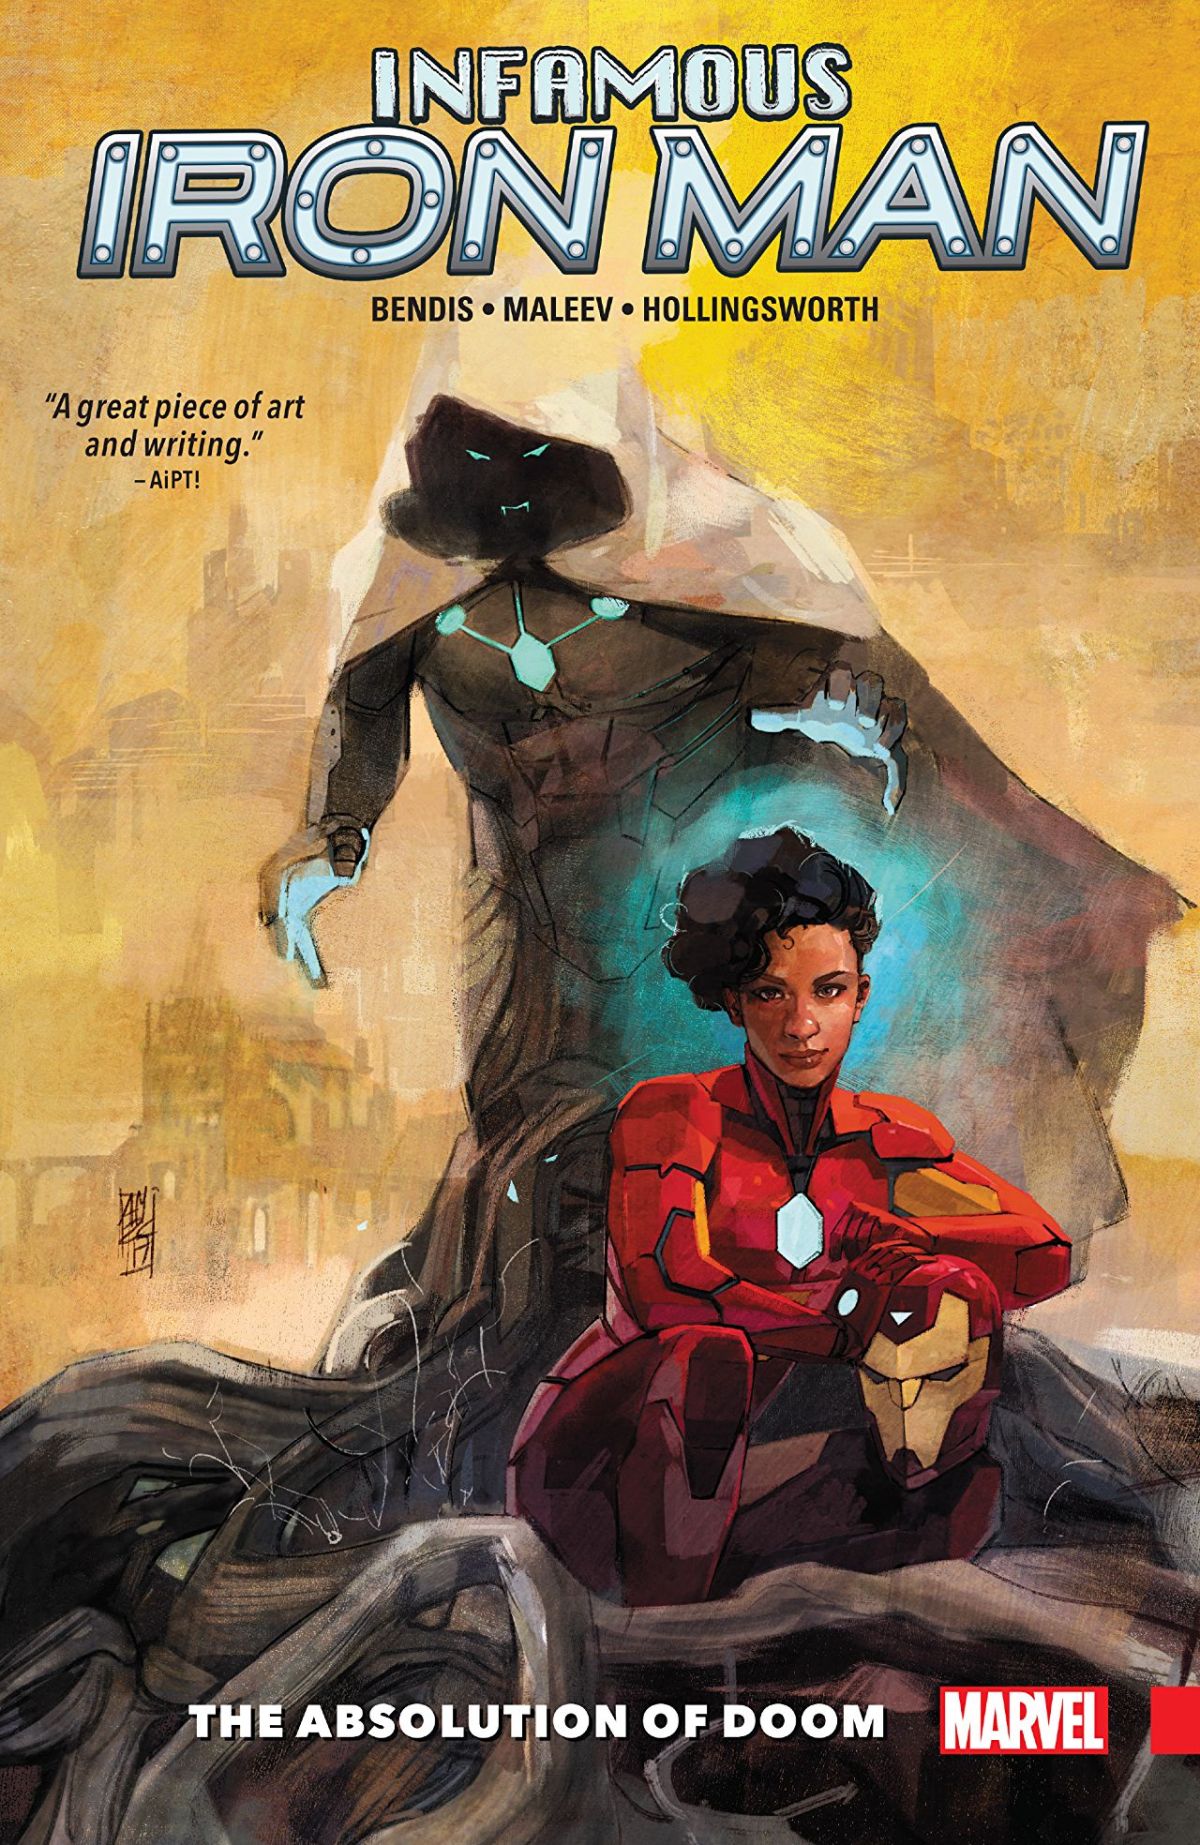 Infamous Iron Man Vol 2: The Absolution Of Doom Review: Better The Devil You Know Than The Devil You Don’t